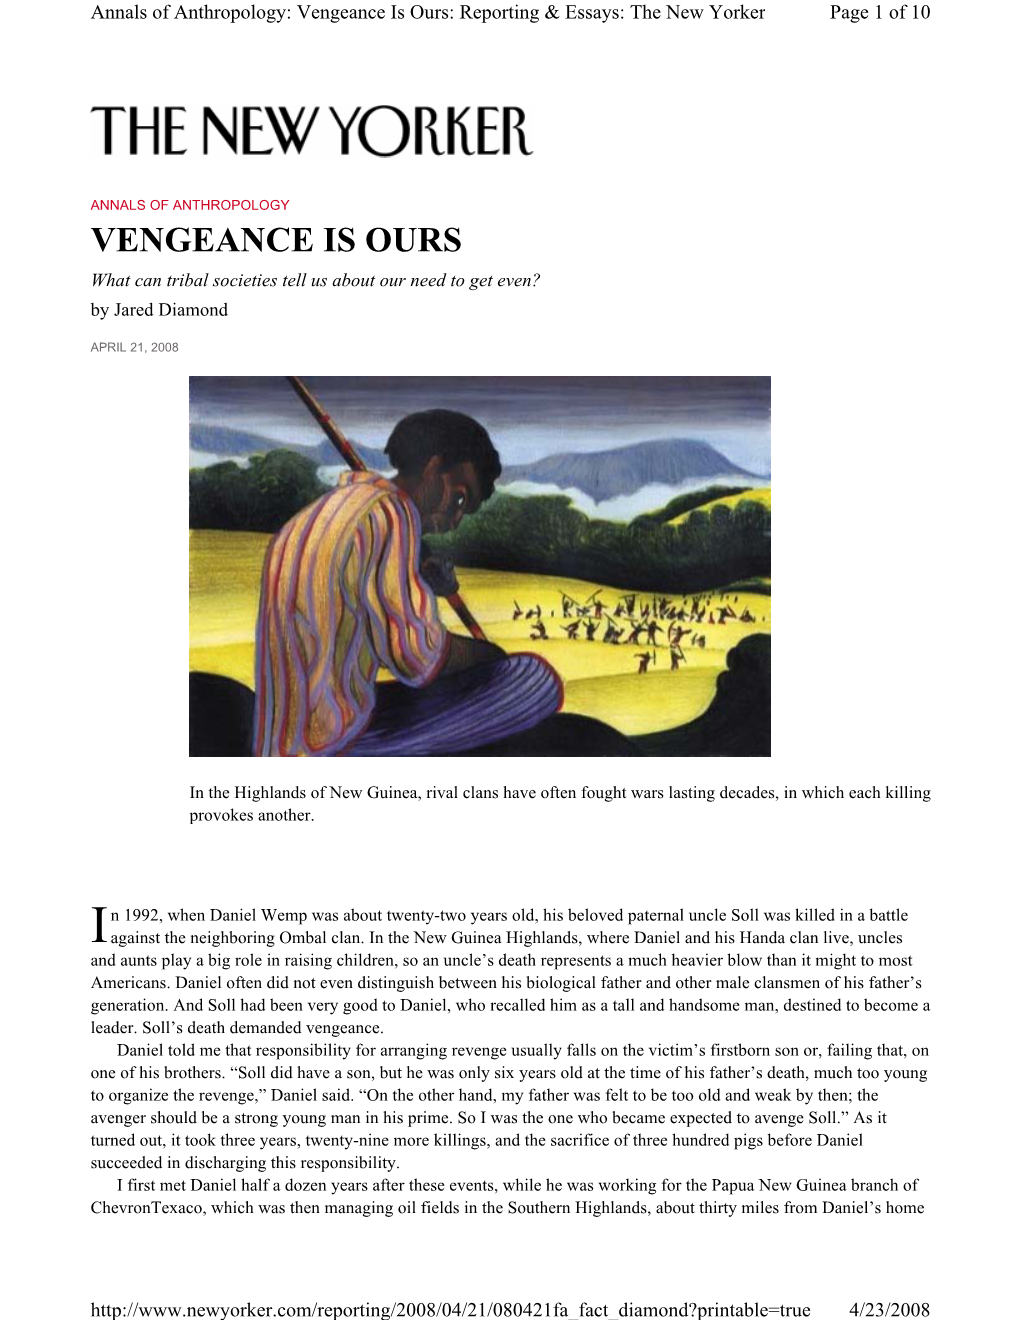 Vengeance Is Ours: Reporting & Essays: the New Yorker Page 1 of 10